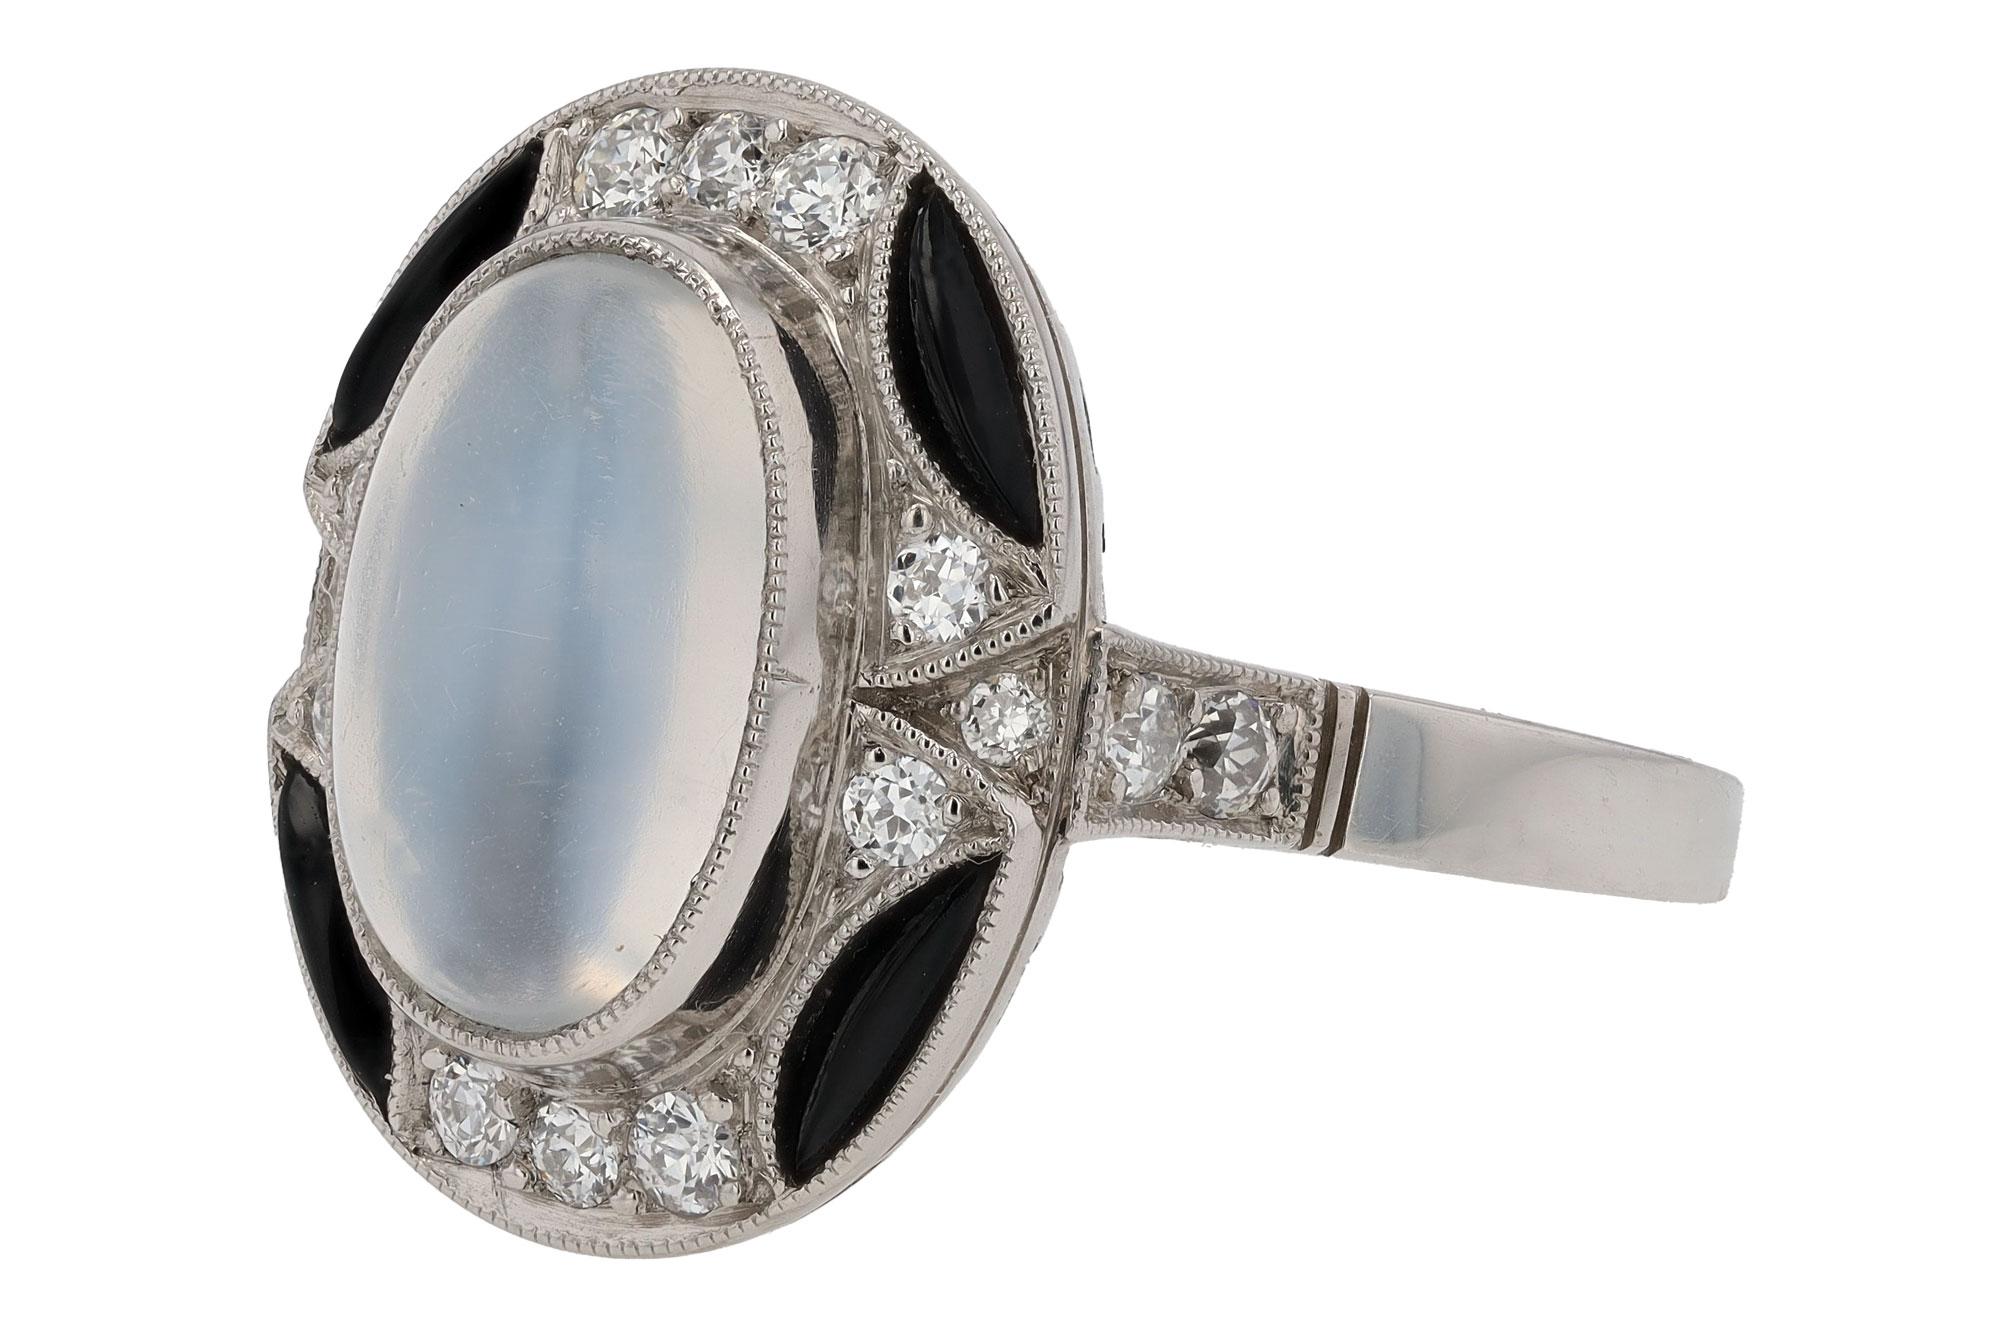 Estate Art Deco Style Moonstone Onyx Diamond Cocktail Ring In Excellent Condition For Sale In Santa Barbara, CA